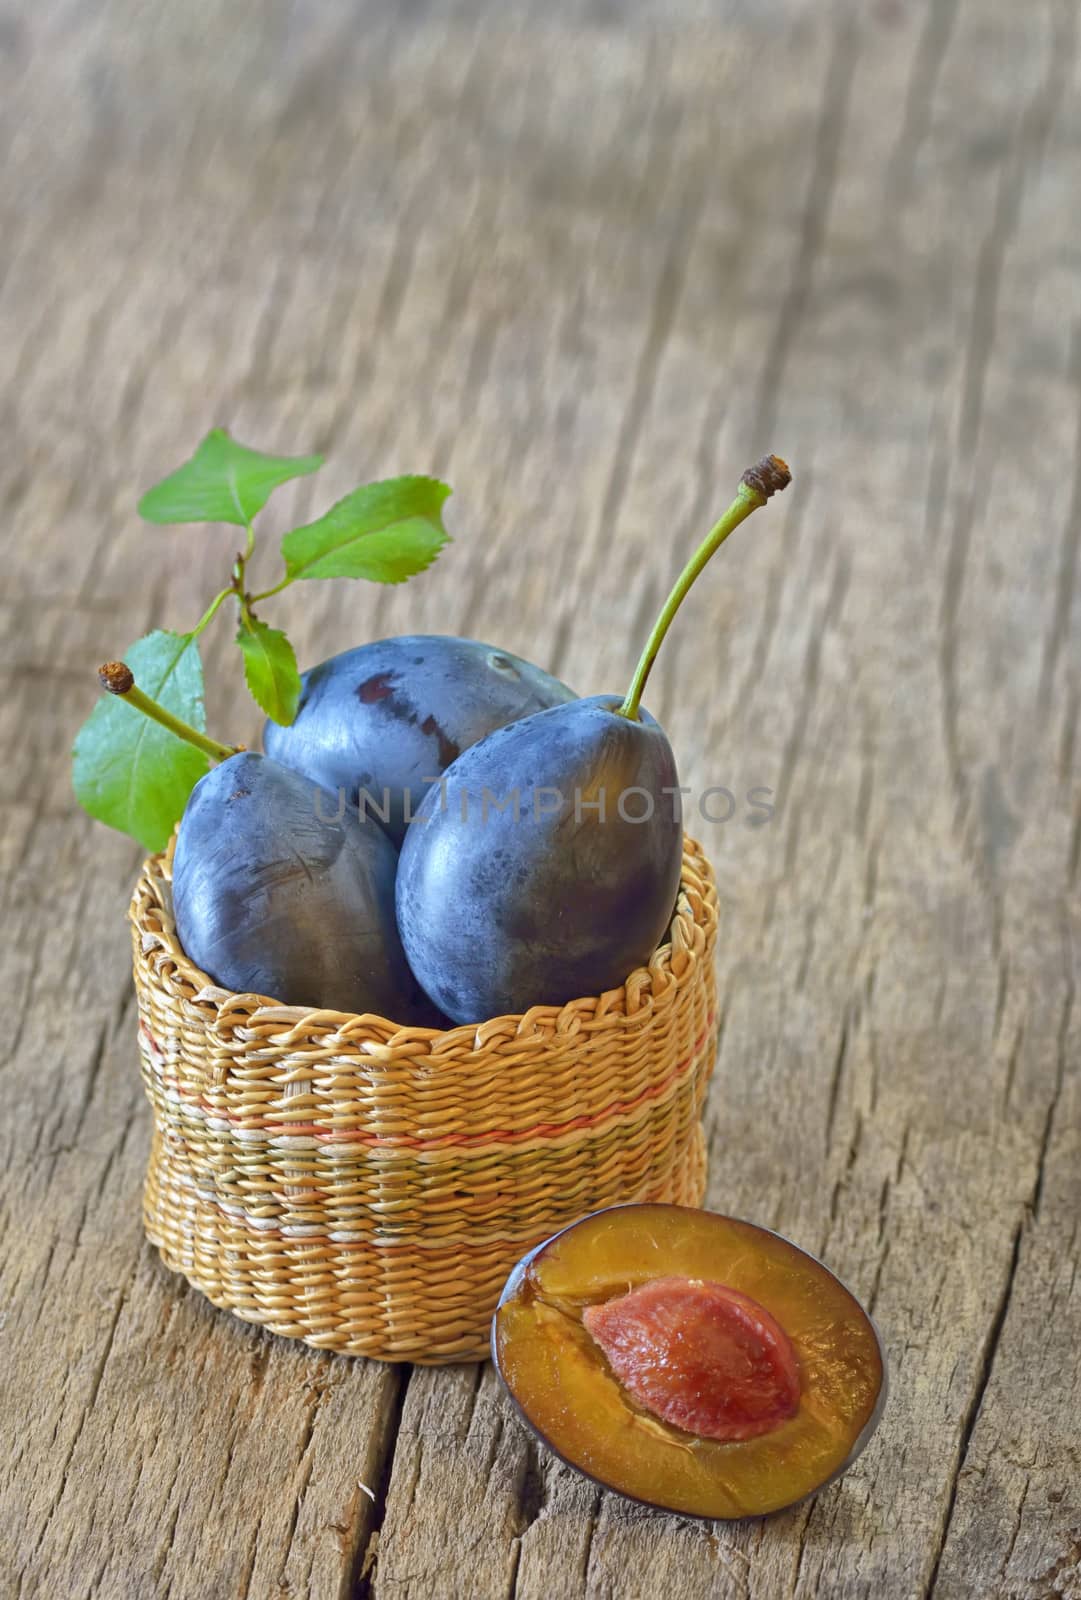 basket with plums on wooden background